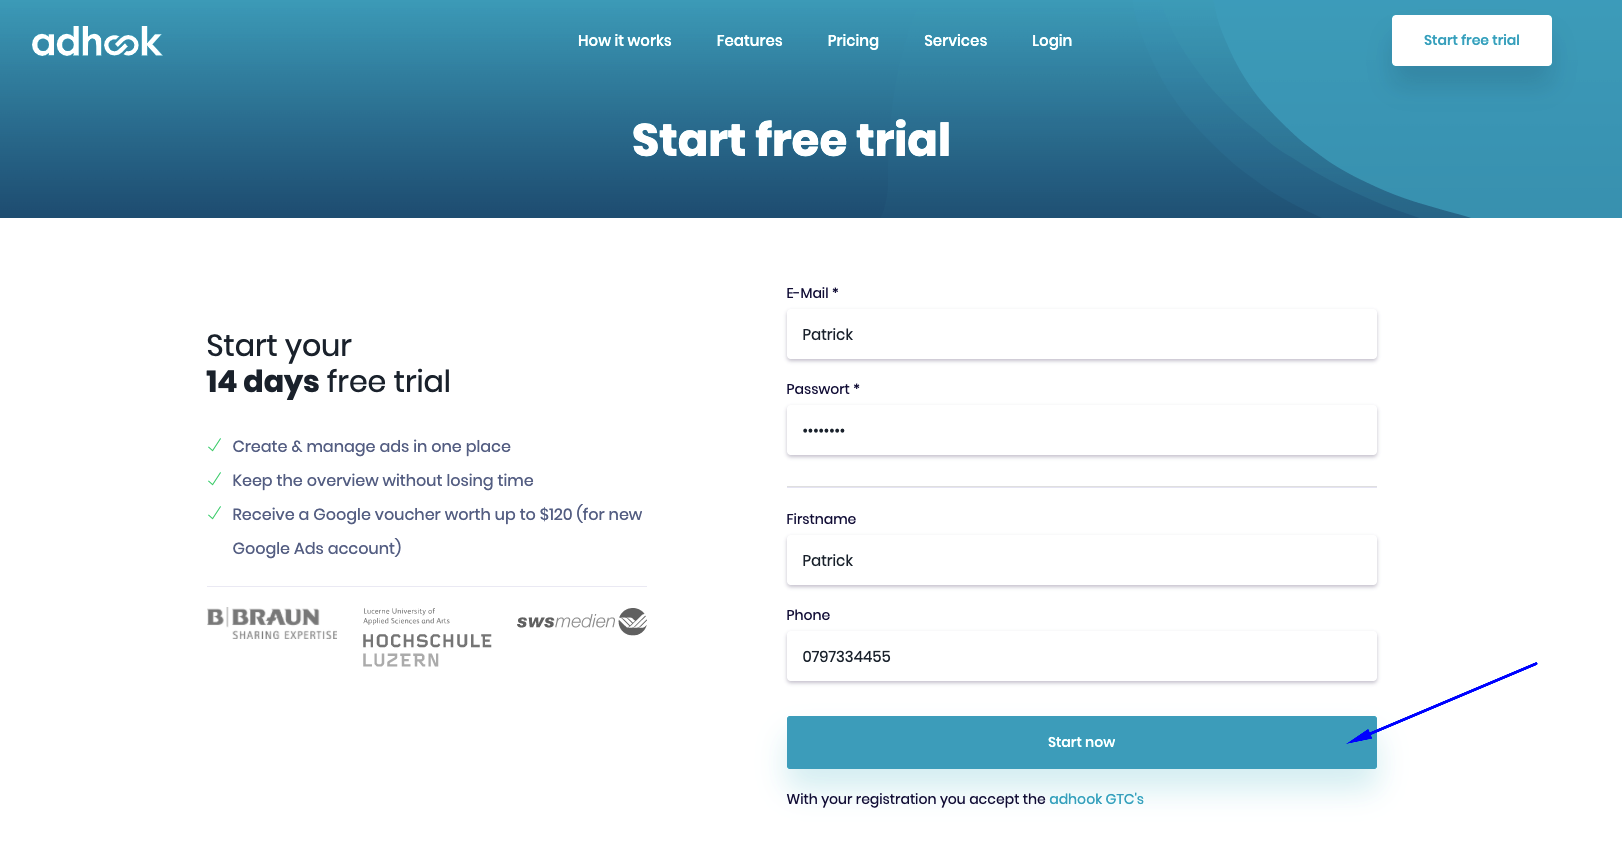 Registration form for the free trial